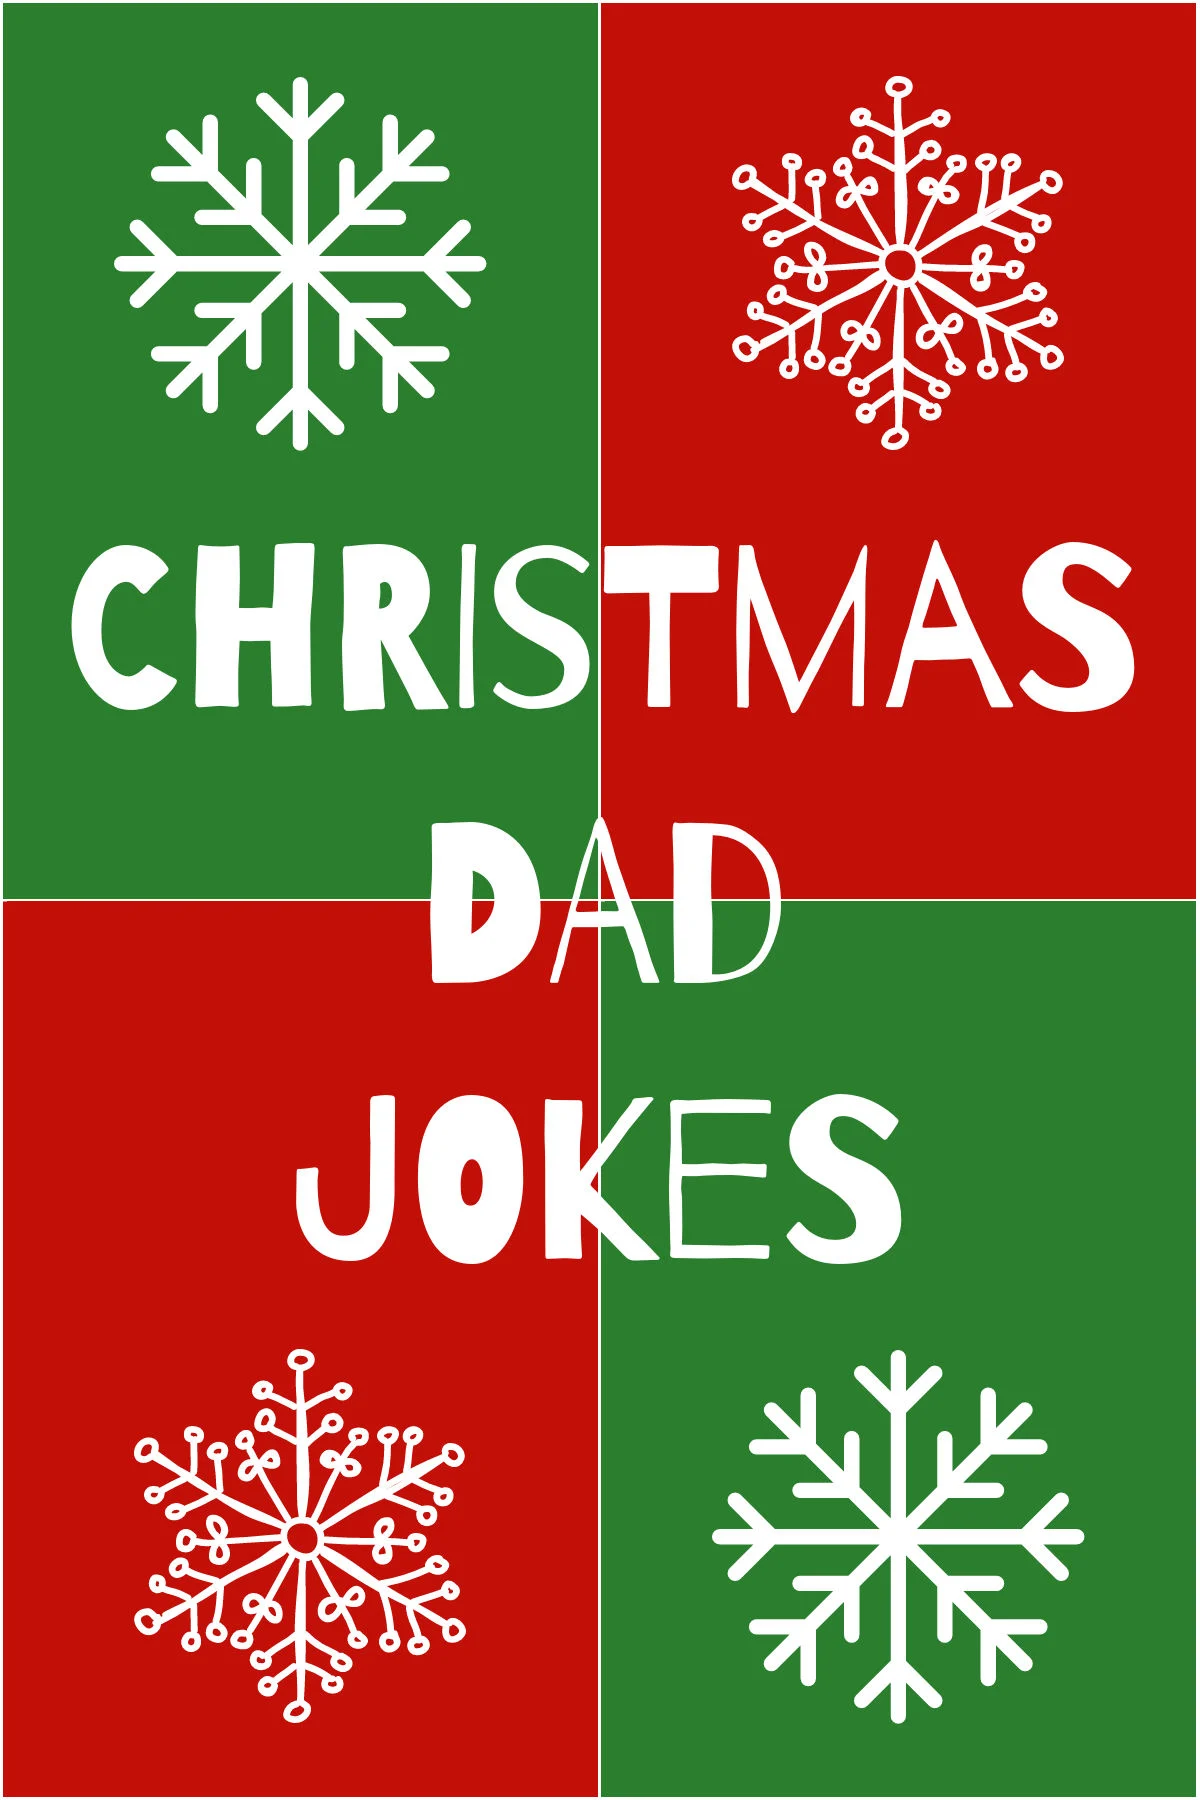 Christmas Dad Jokes on a red and green background